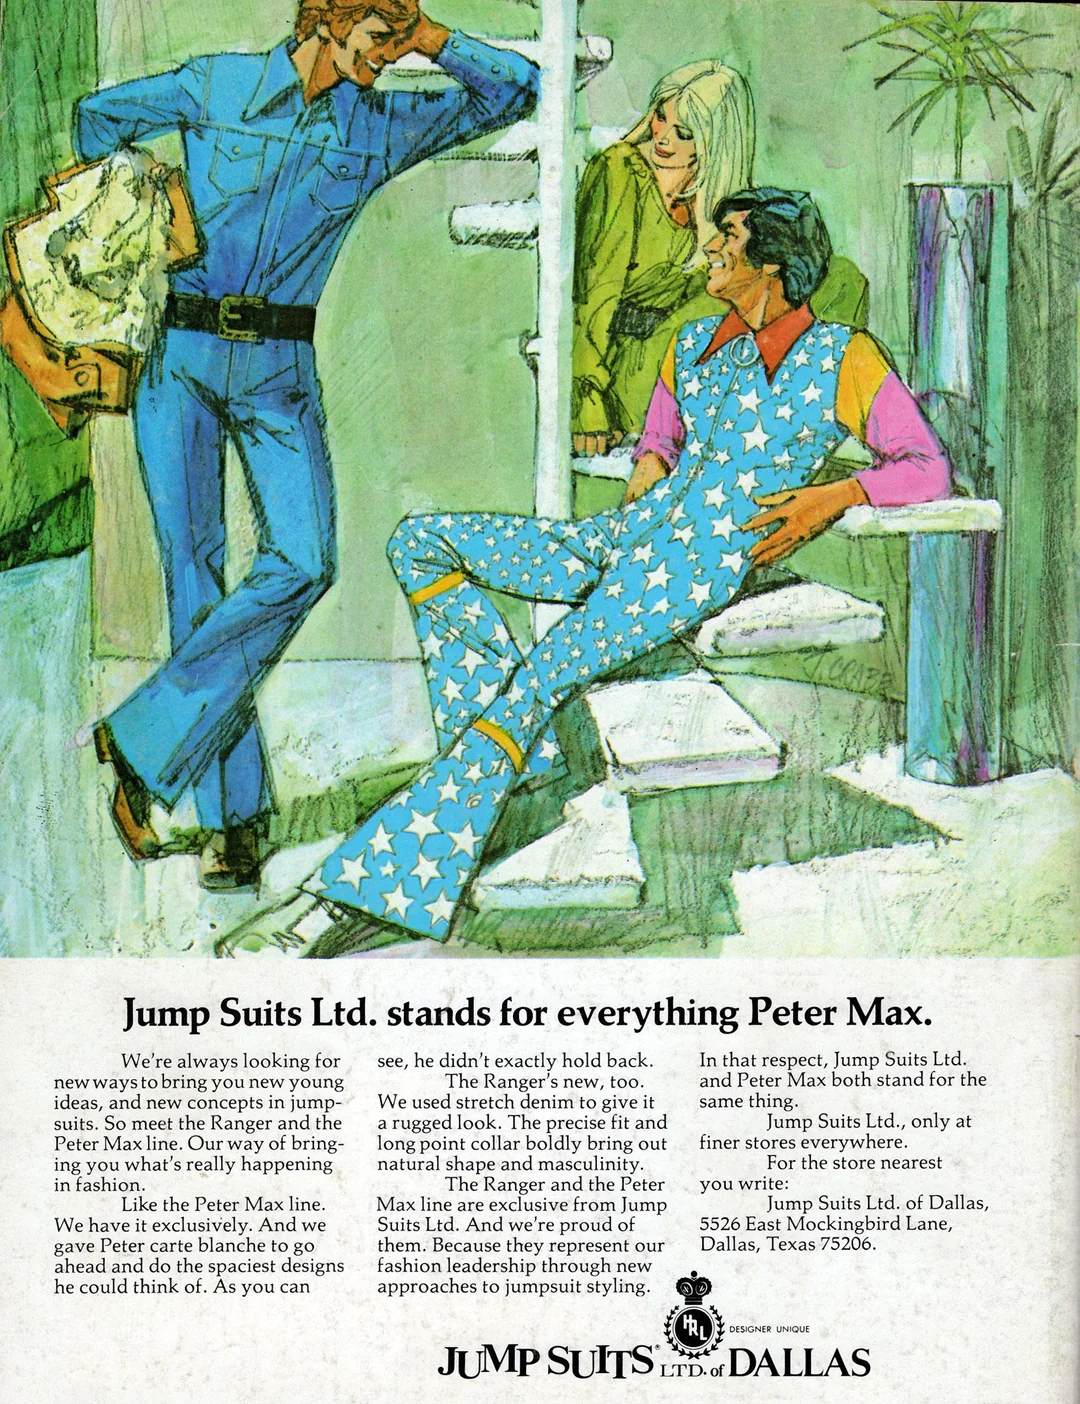 Jump Suits Ltd. stands for everything Peter Max.